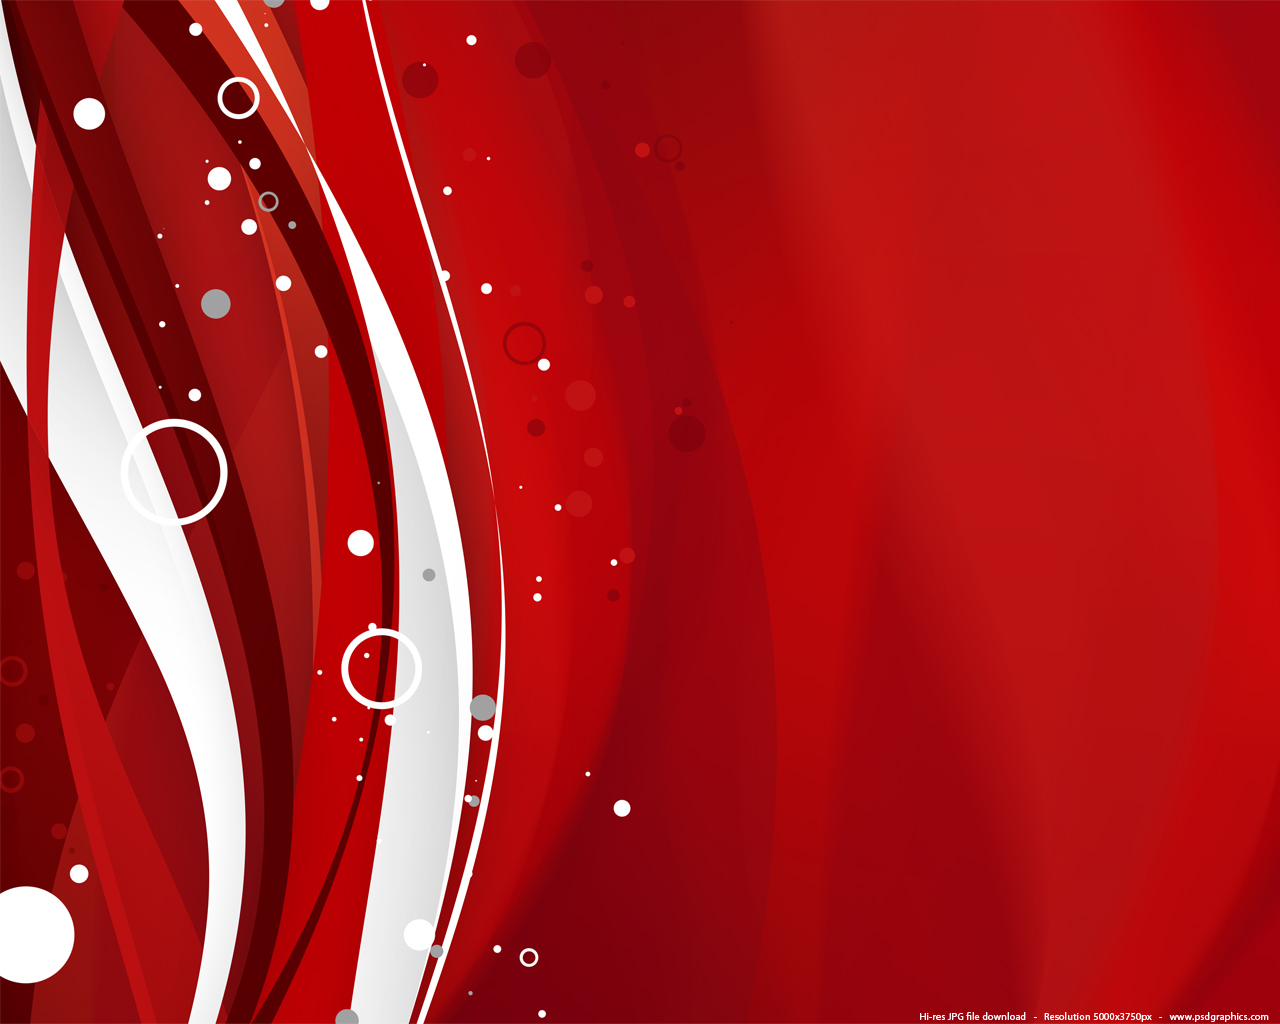 Red Design Background HD Wallpapers on picsfaircom